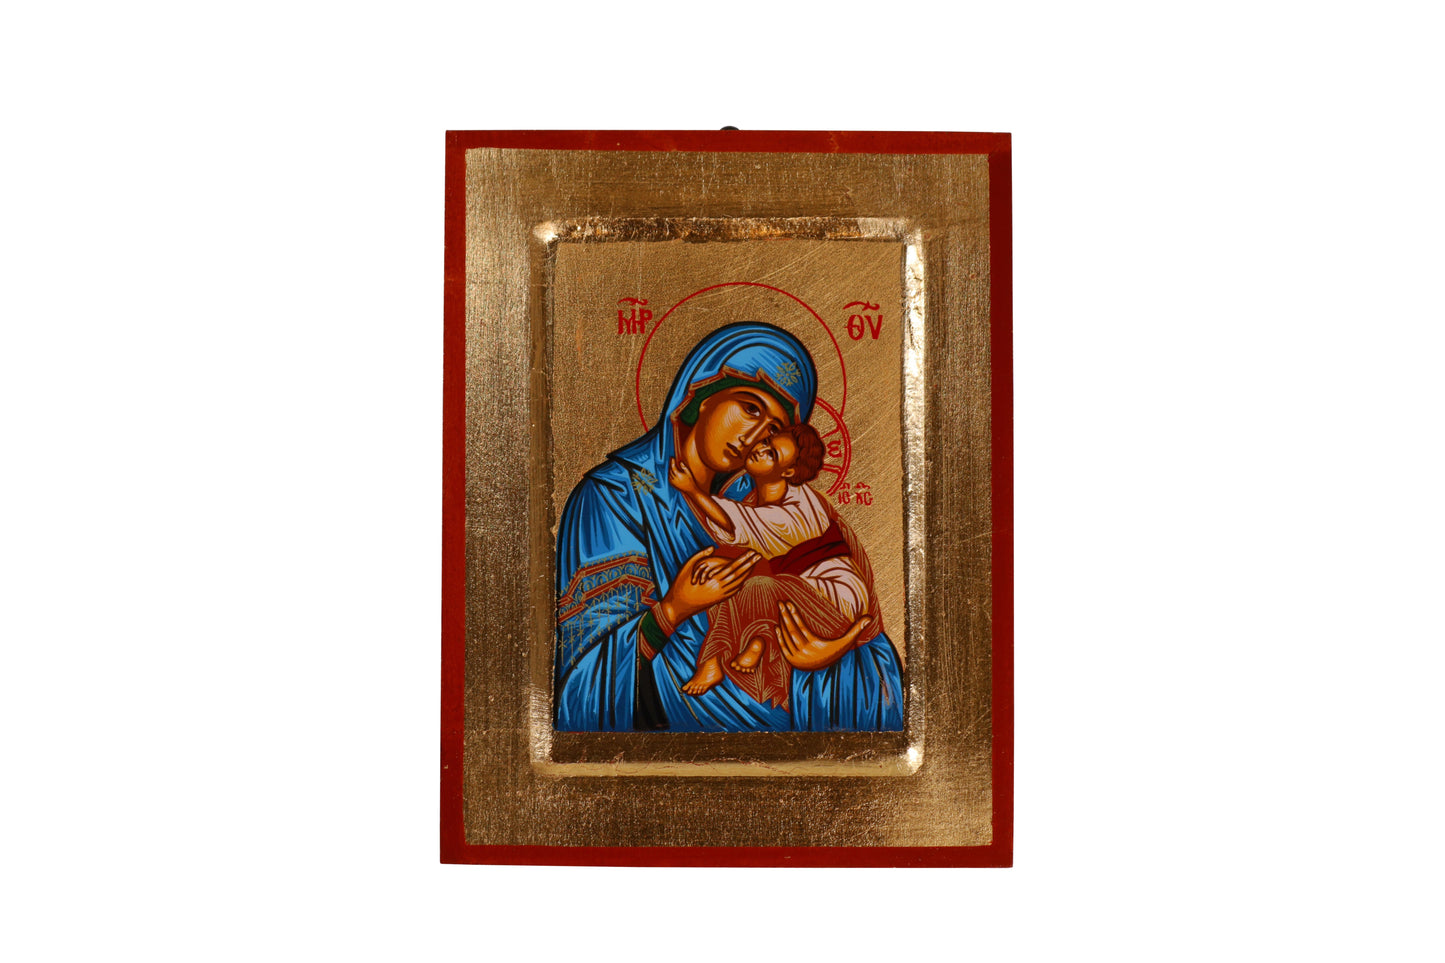 A hand-painted icon of the Virgin Mary in a blue robe cradling the infant Jesus against a golden background, within a red frame. Mary has a contemplative expression and a halo inscribed with "MP OY," while Jesus looks outward with a hand raised in blessing and a halo with a cross.